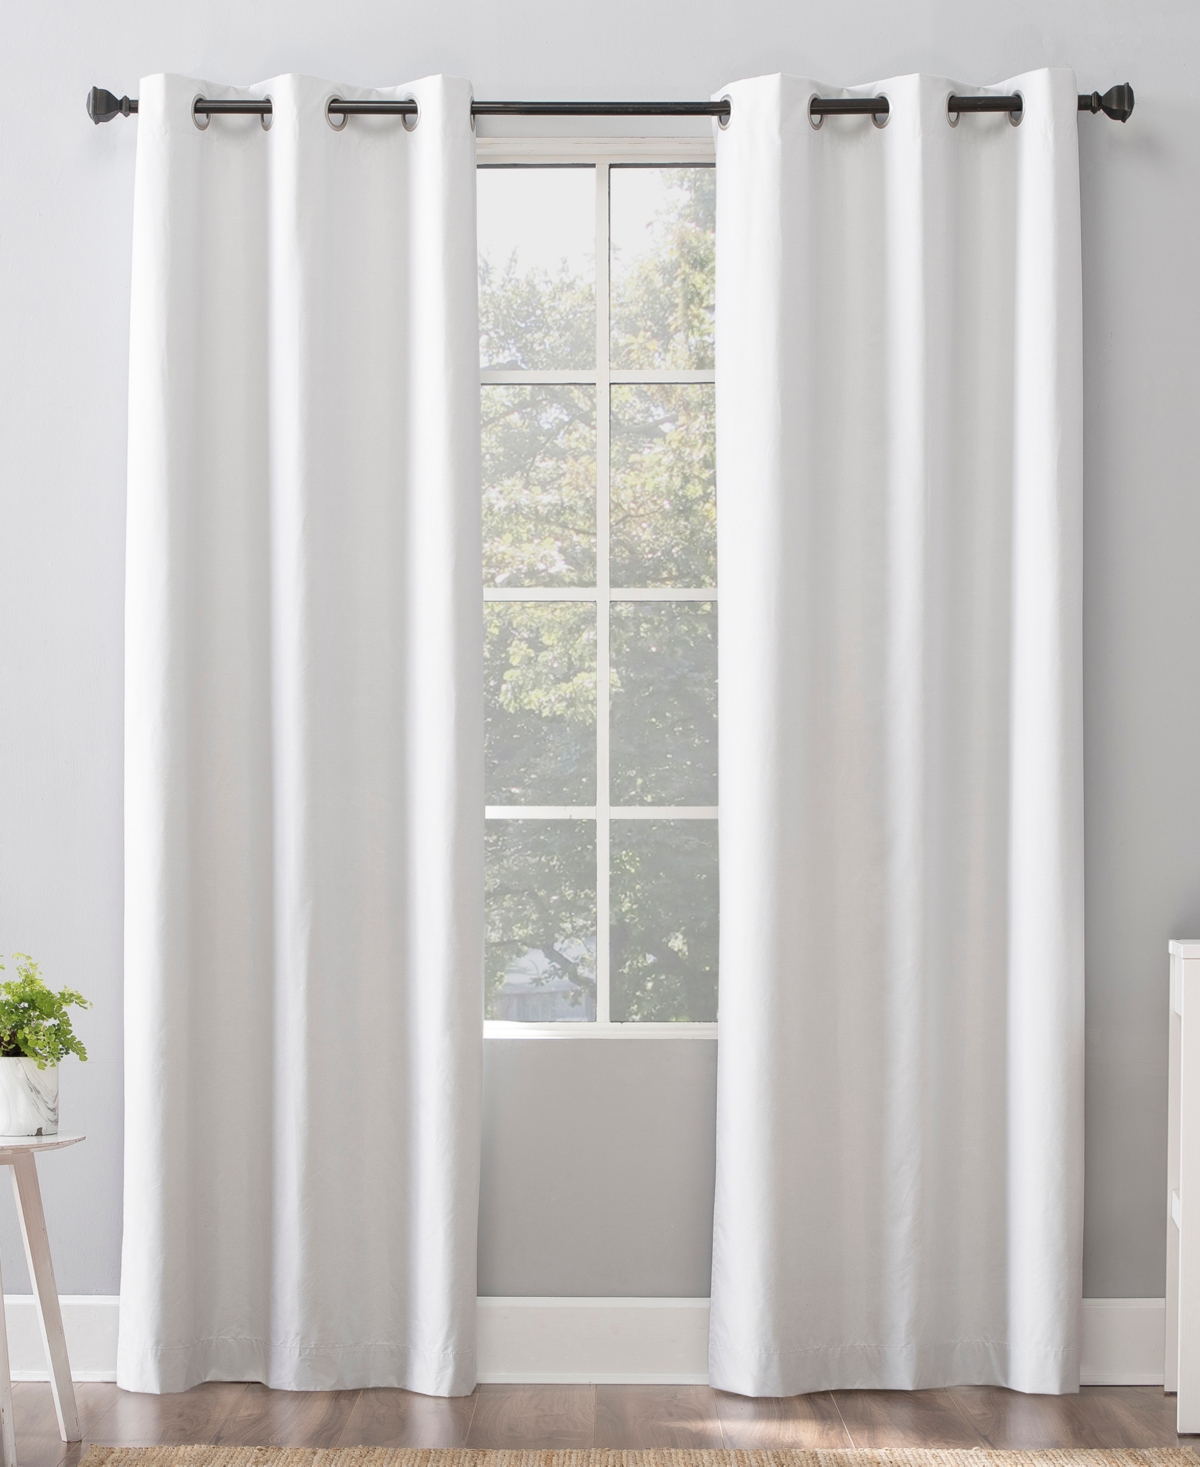 Sun Zero Cyrus Thermal Blackout Grommet Curtain Panel, 96" L X 40" W In Winter White